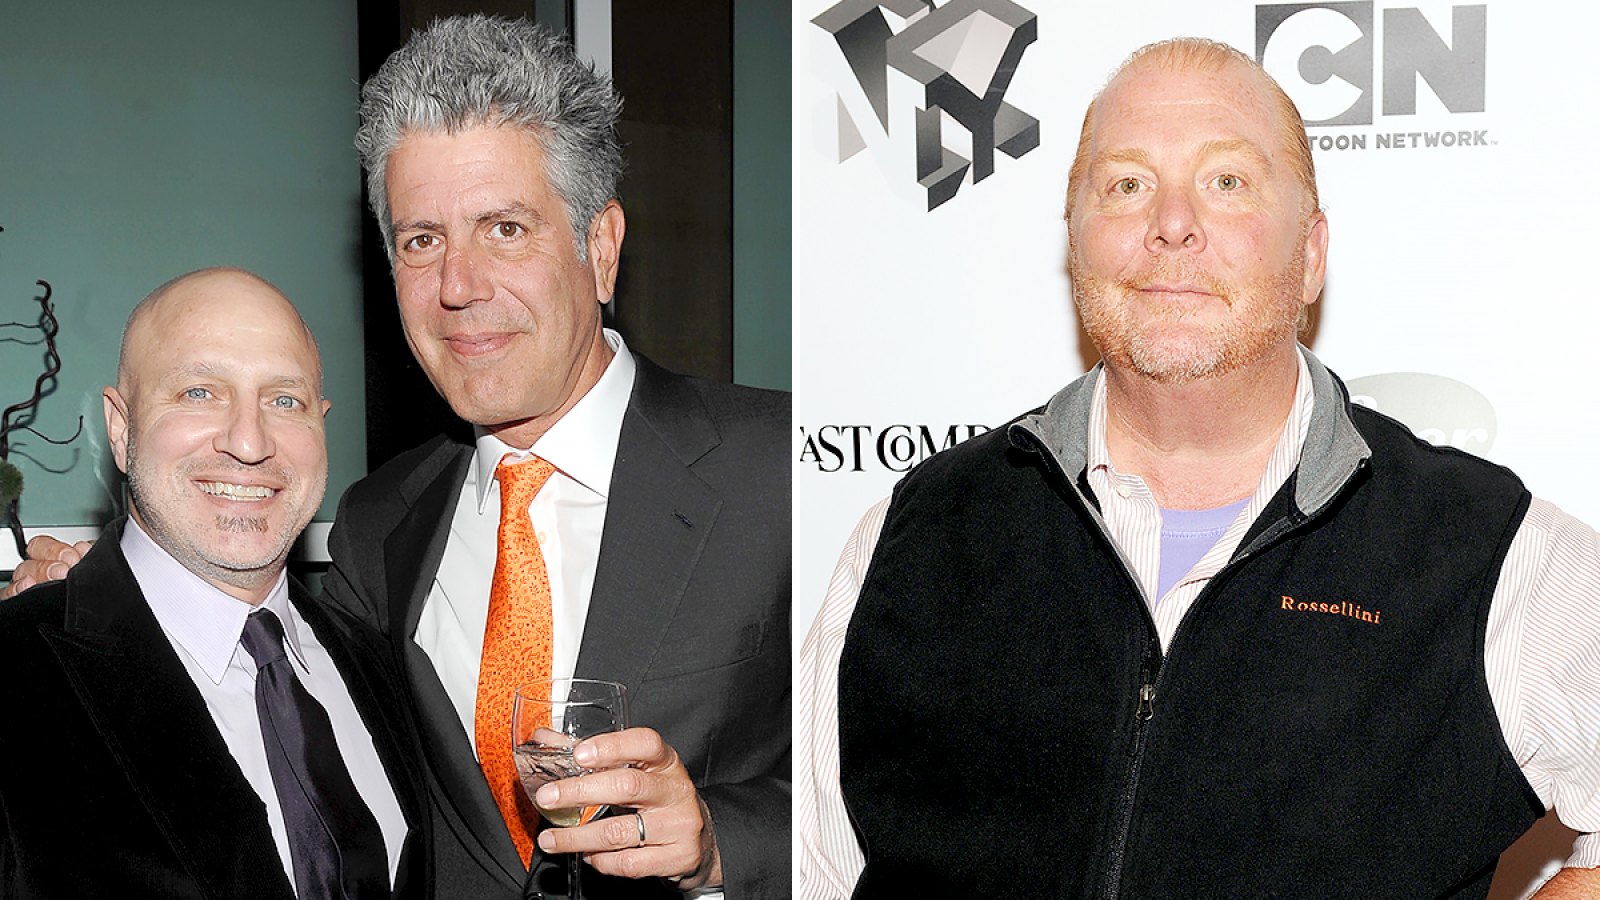 Tom-Colicchio-and-Anthony-Bourdain-Mario-Batalis-sexual-misconduct